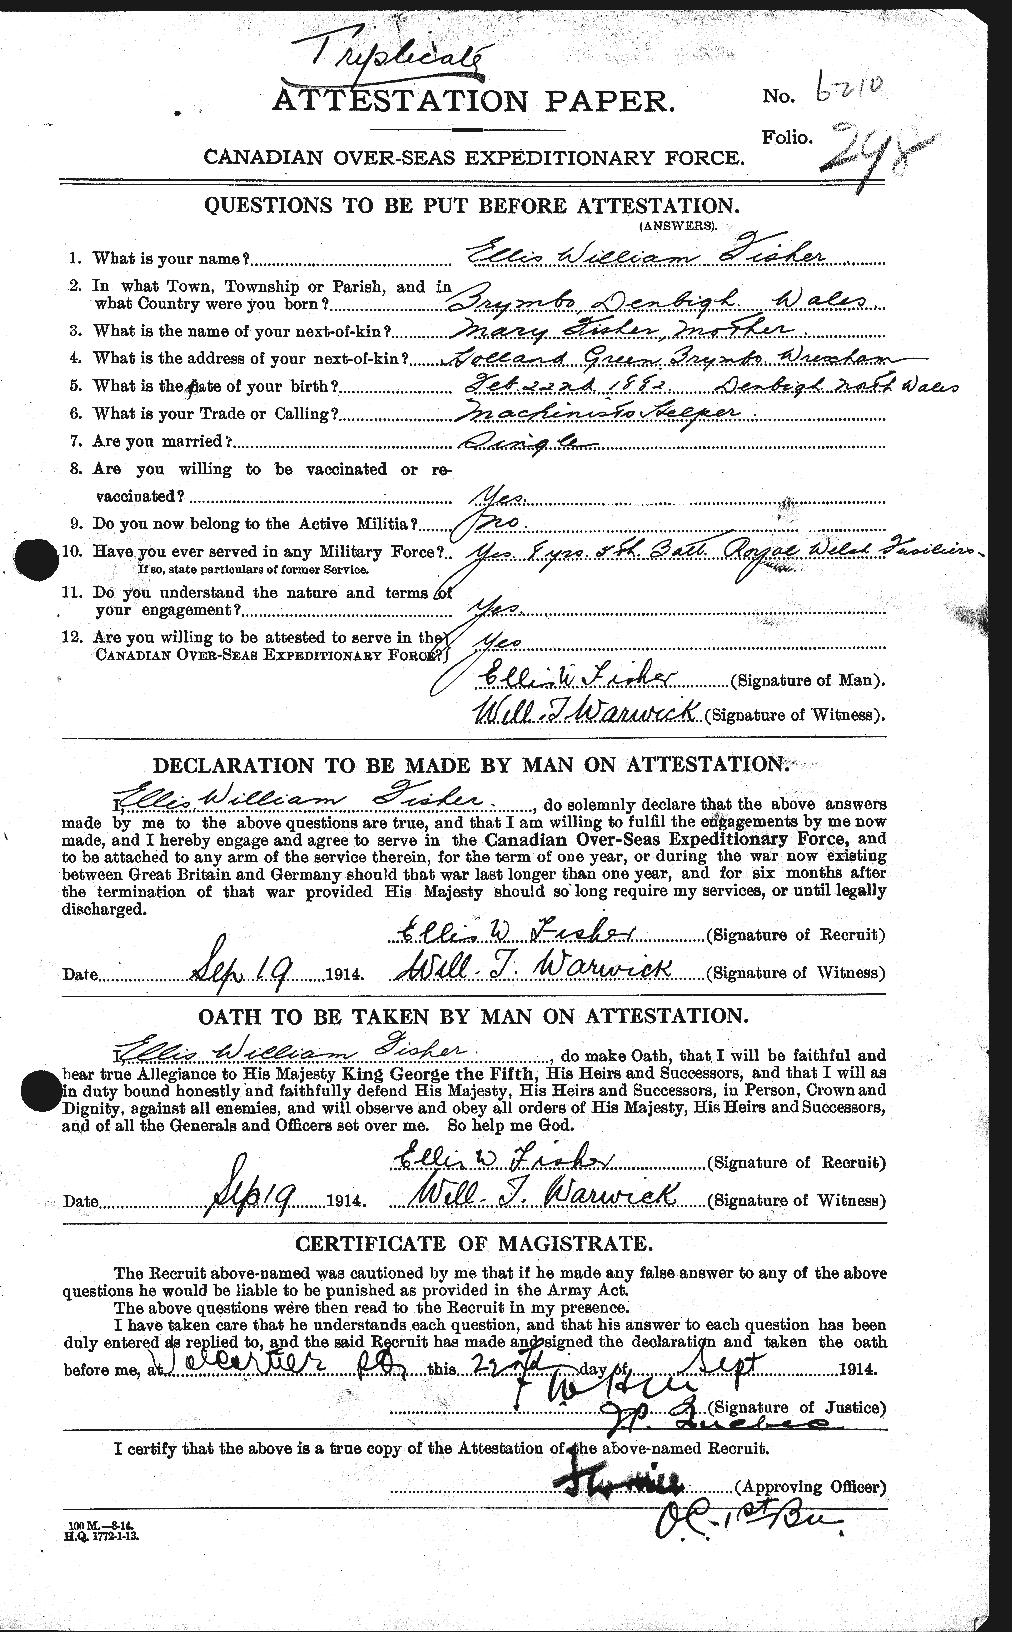 Personnel Records of the First World War - CEF 325384a